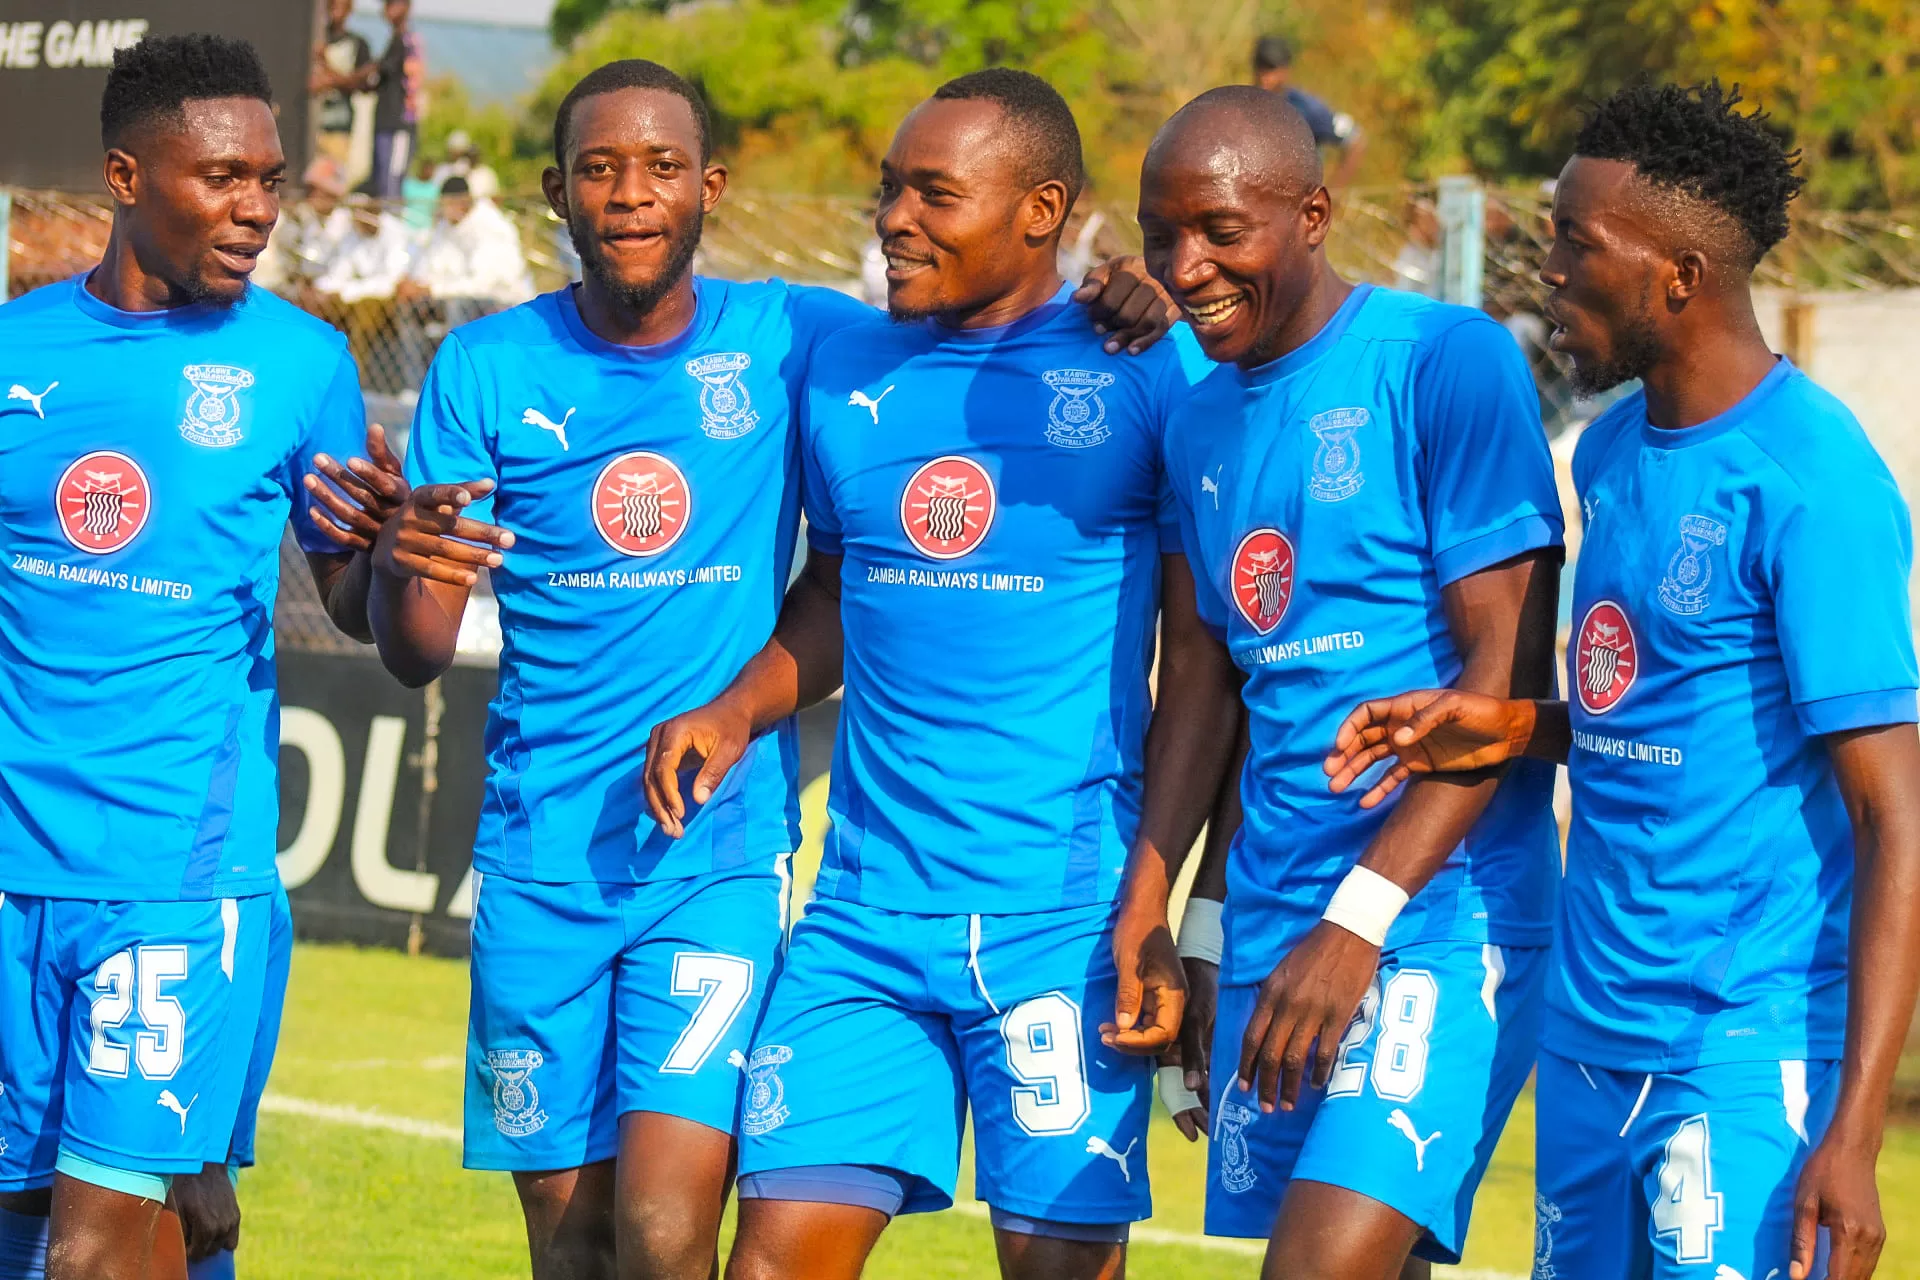 Zambia Premier League Week Four Unwrapped: Thrills, Surprises, and Dramatic Results